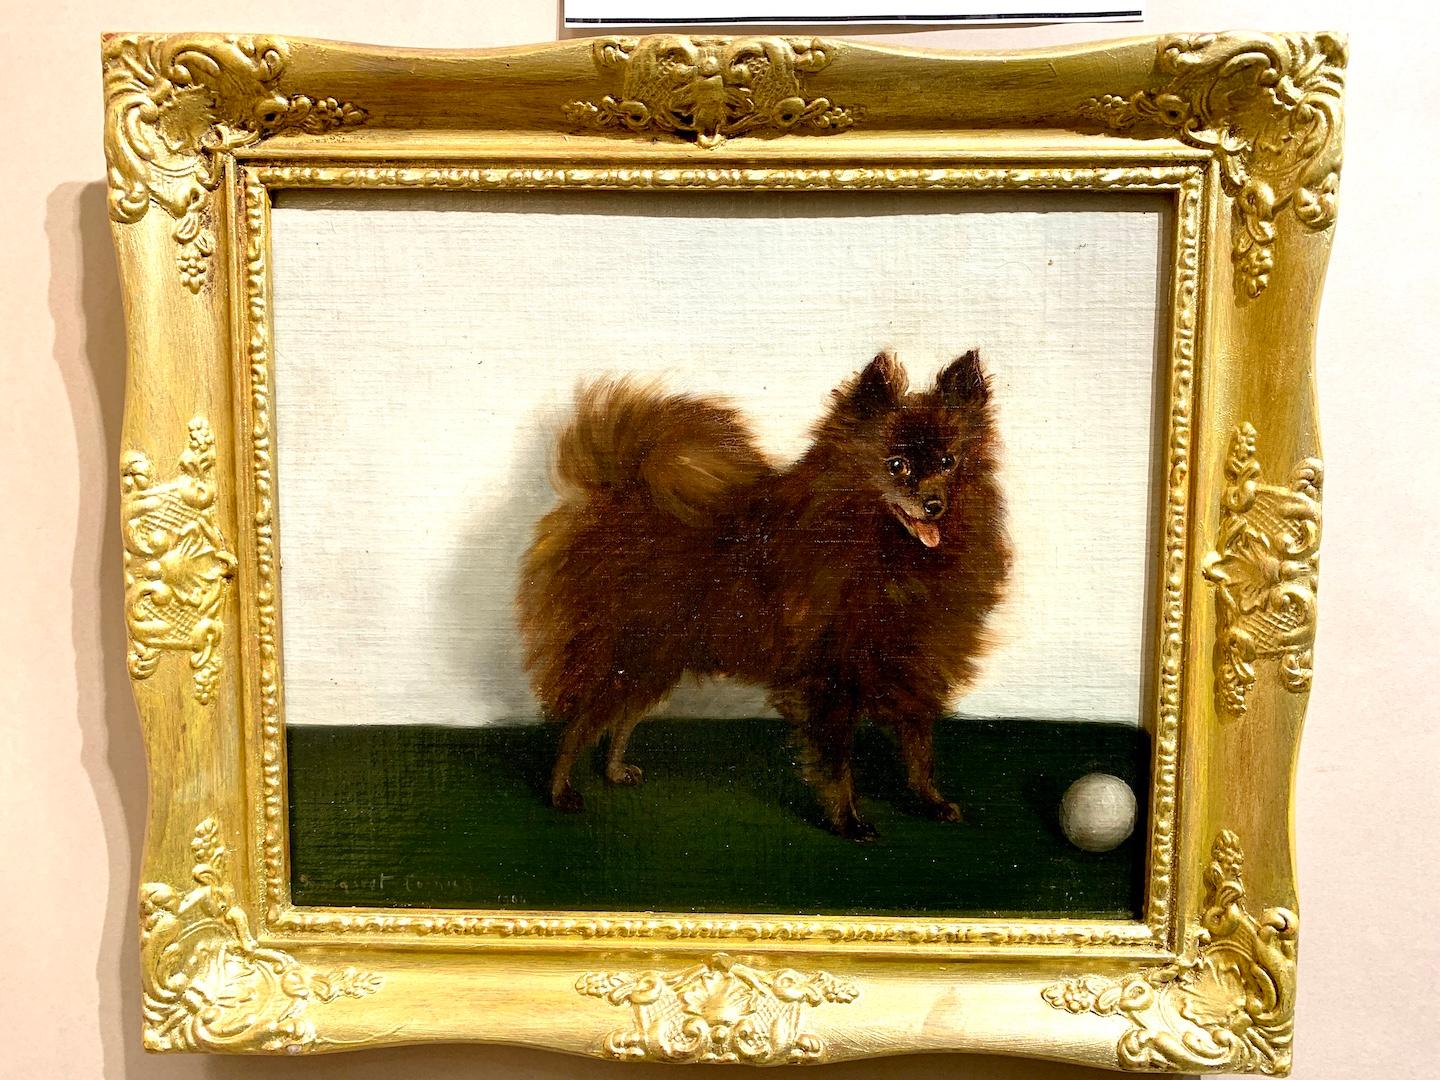 Margret Cornish Animal Painting - Early 20th century oil portrait of a Brown Pomeranian dog in an interior